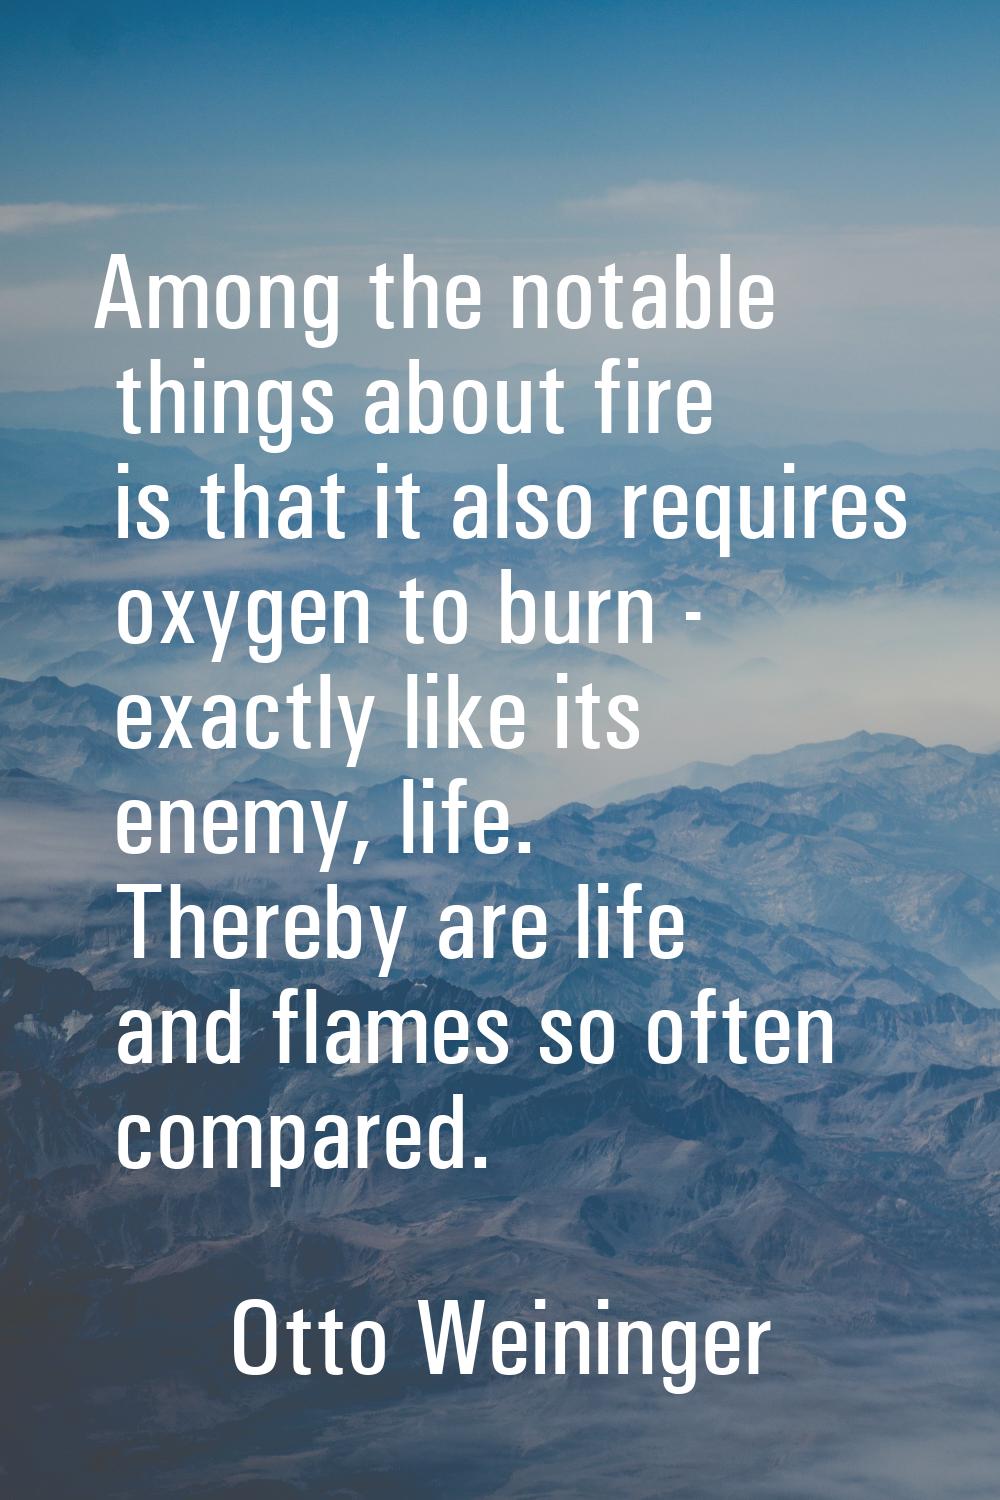 Among the notable things about fire is that it also requires oxygen to burn - exactly like its enem